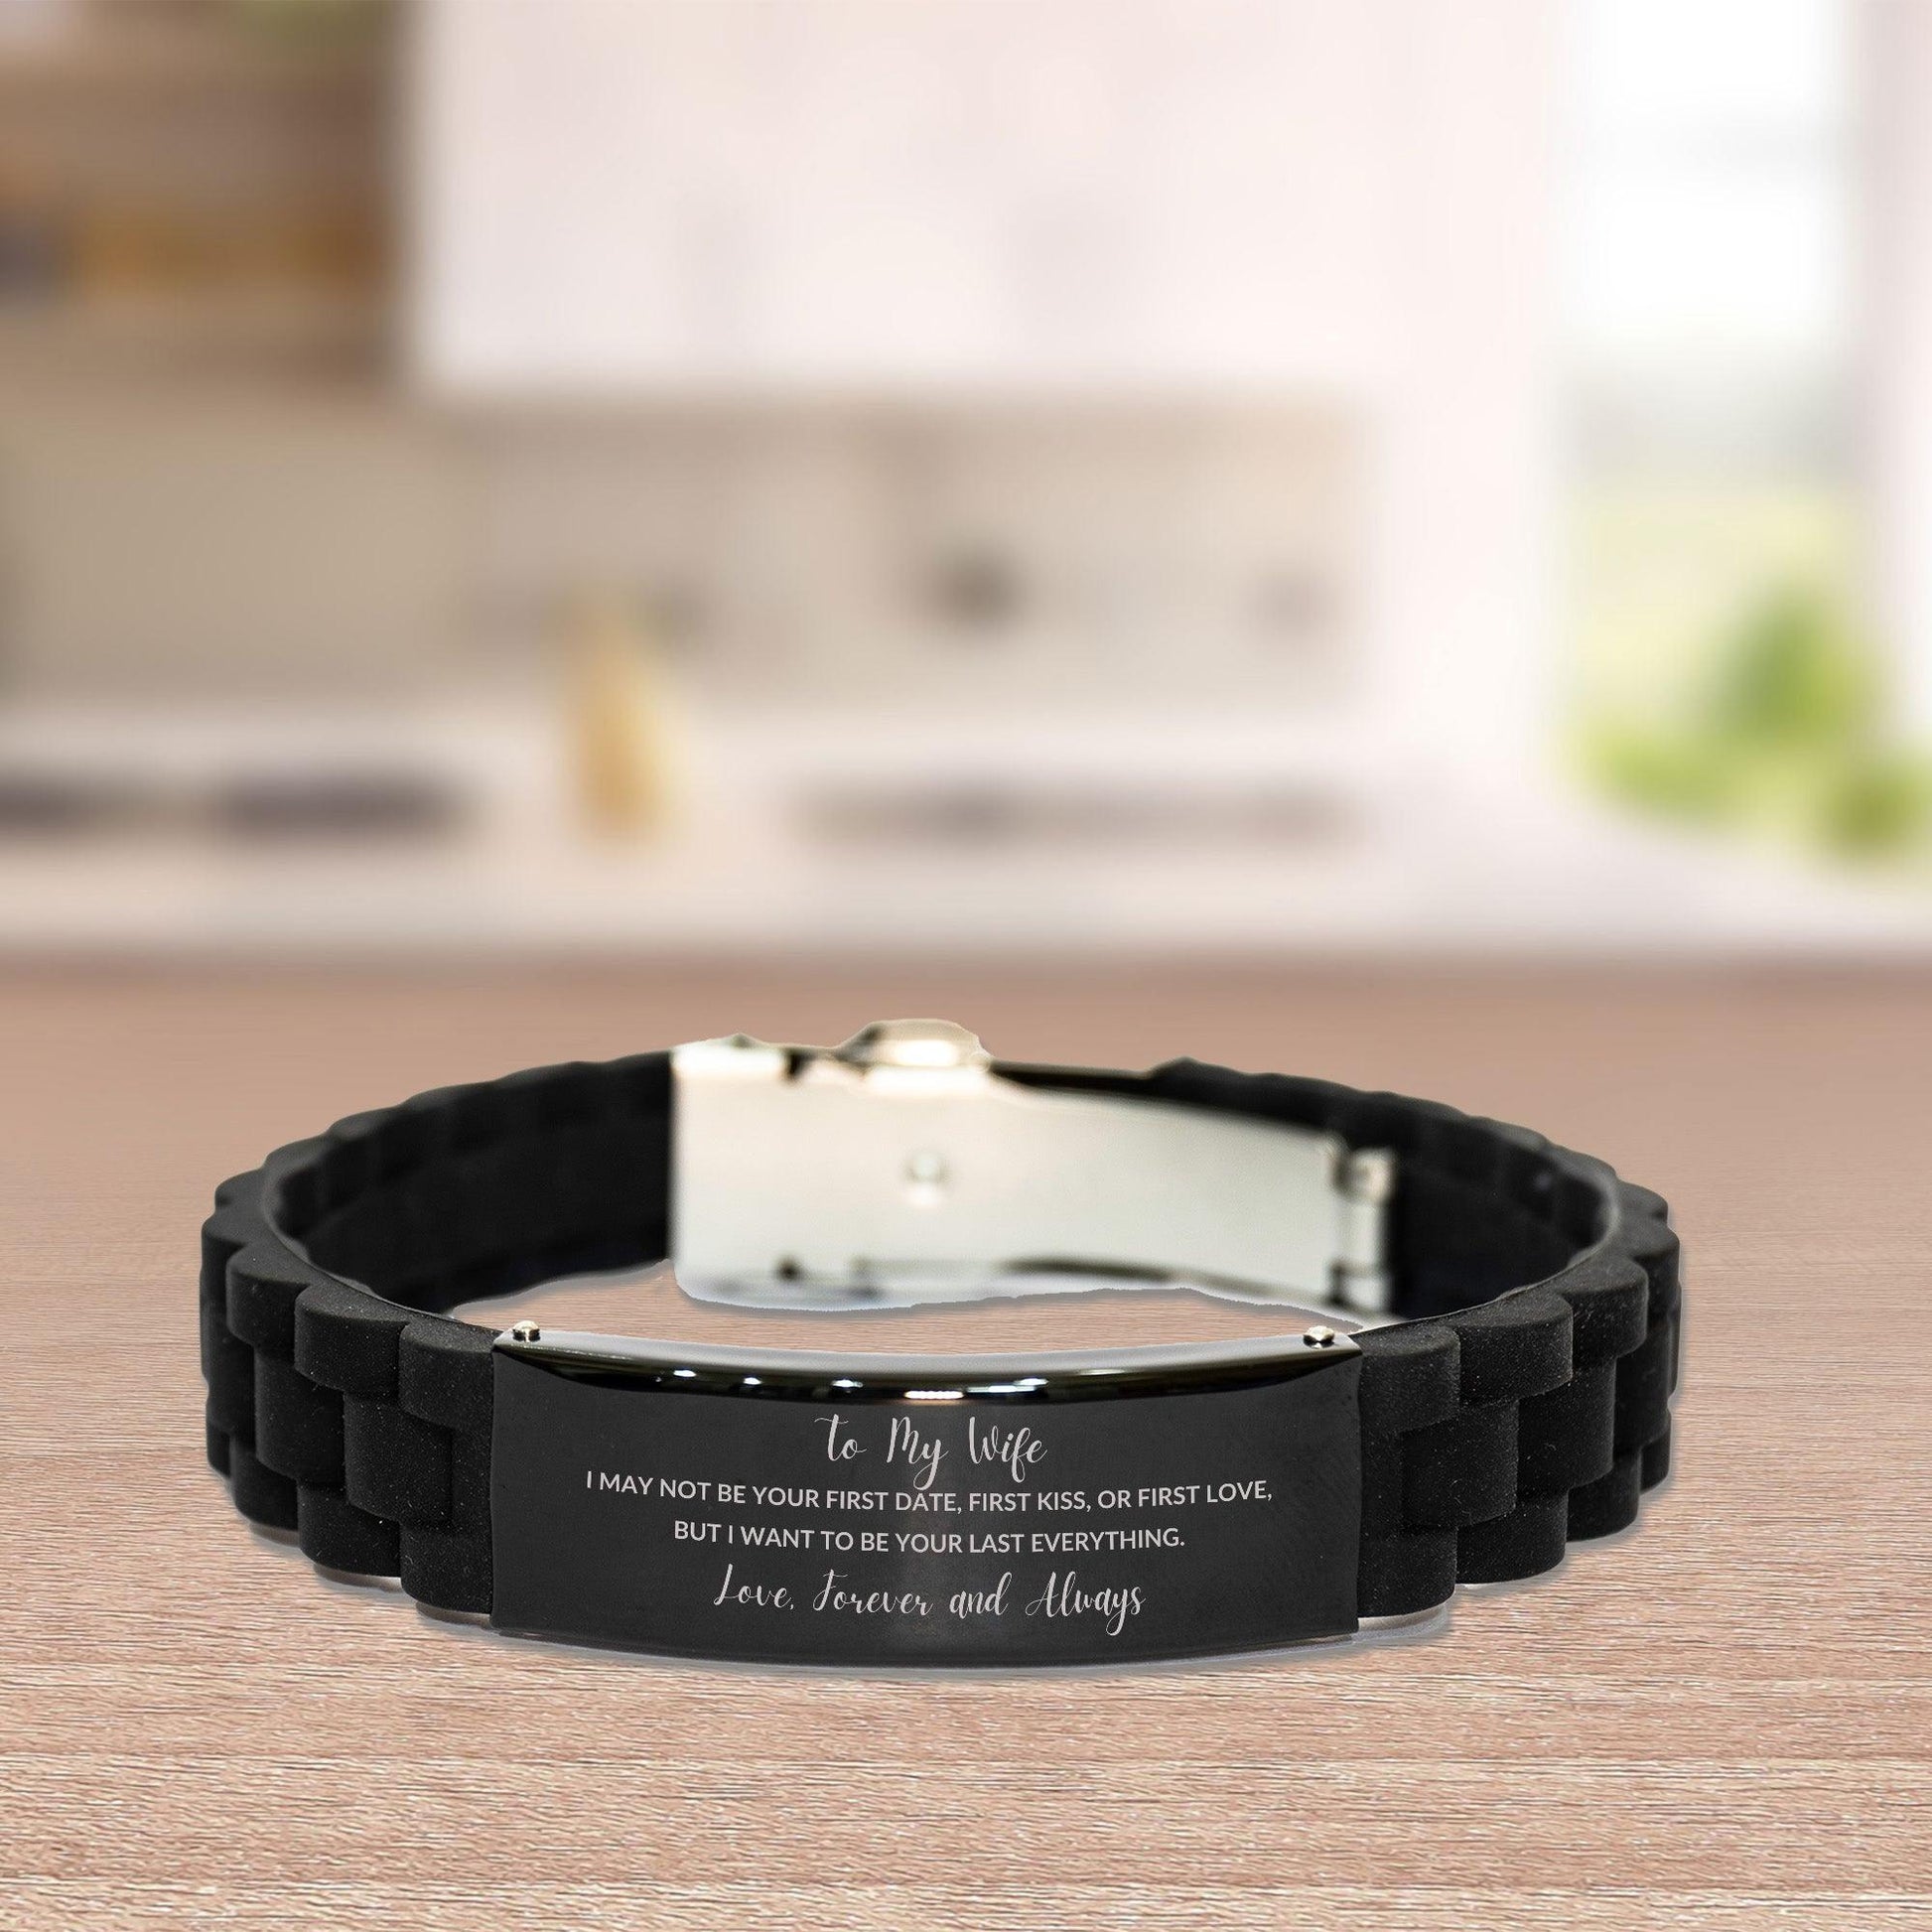 To My Wife I Want to Be Your Last Everything Engraved Black Glidelock Clasp Bracelet - Mallard Moon Gift Shop